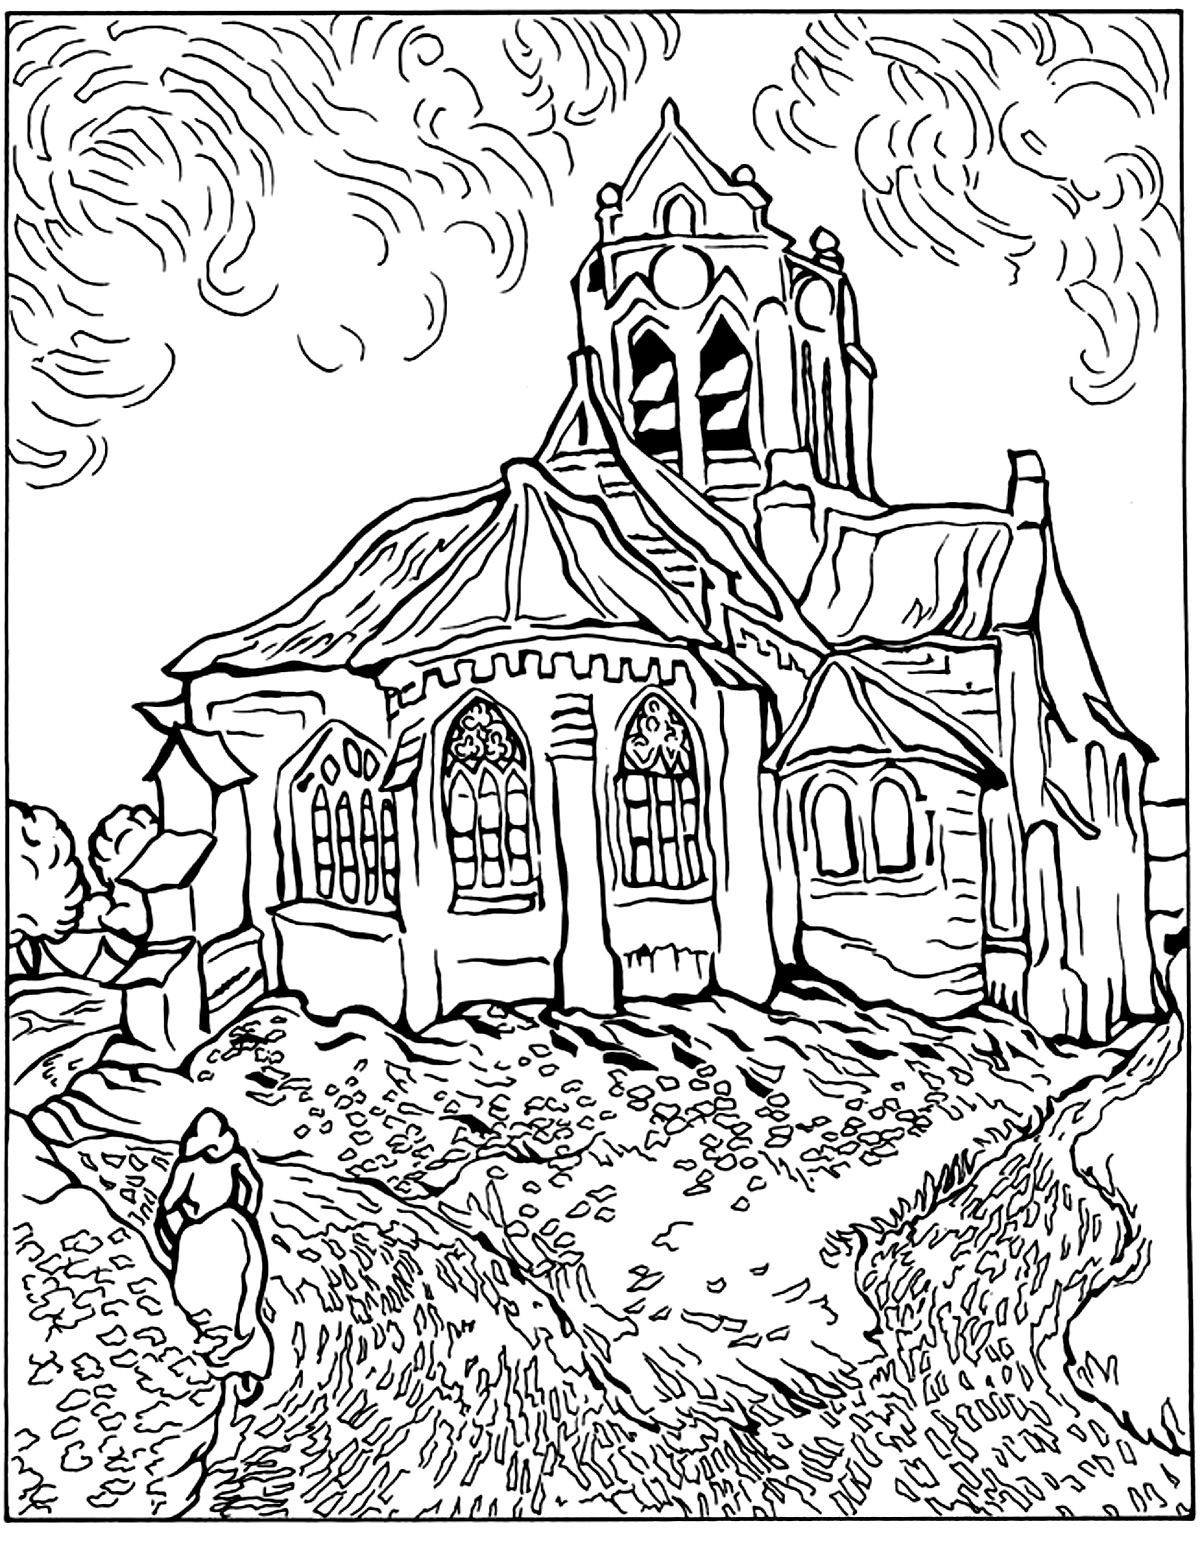 Get your pencils and markers ready to color this Van Gogh coloring page